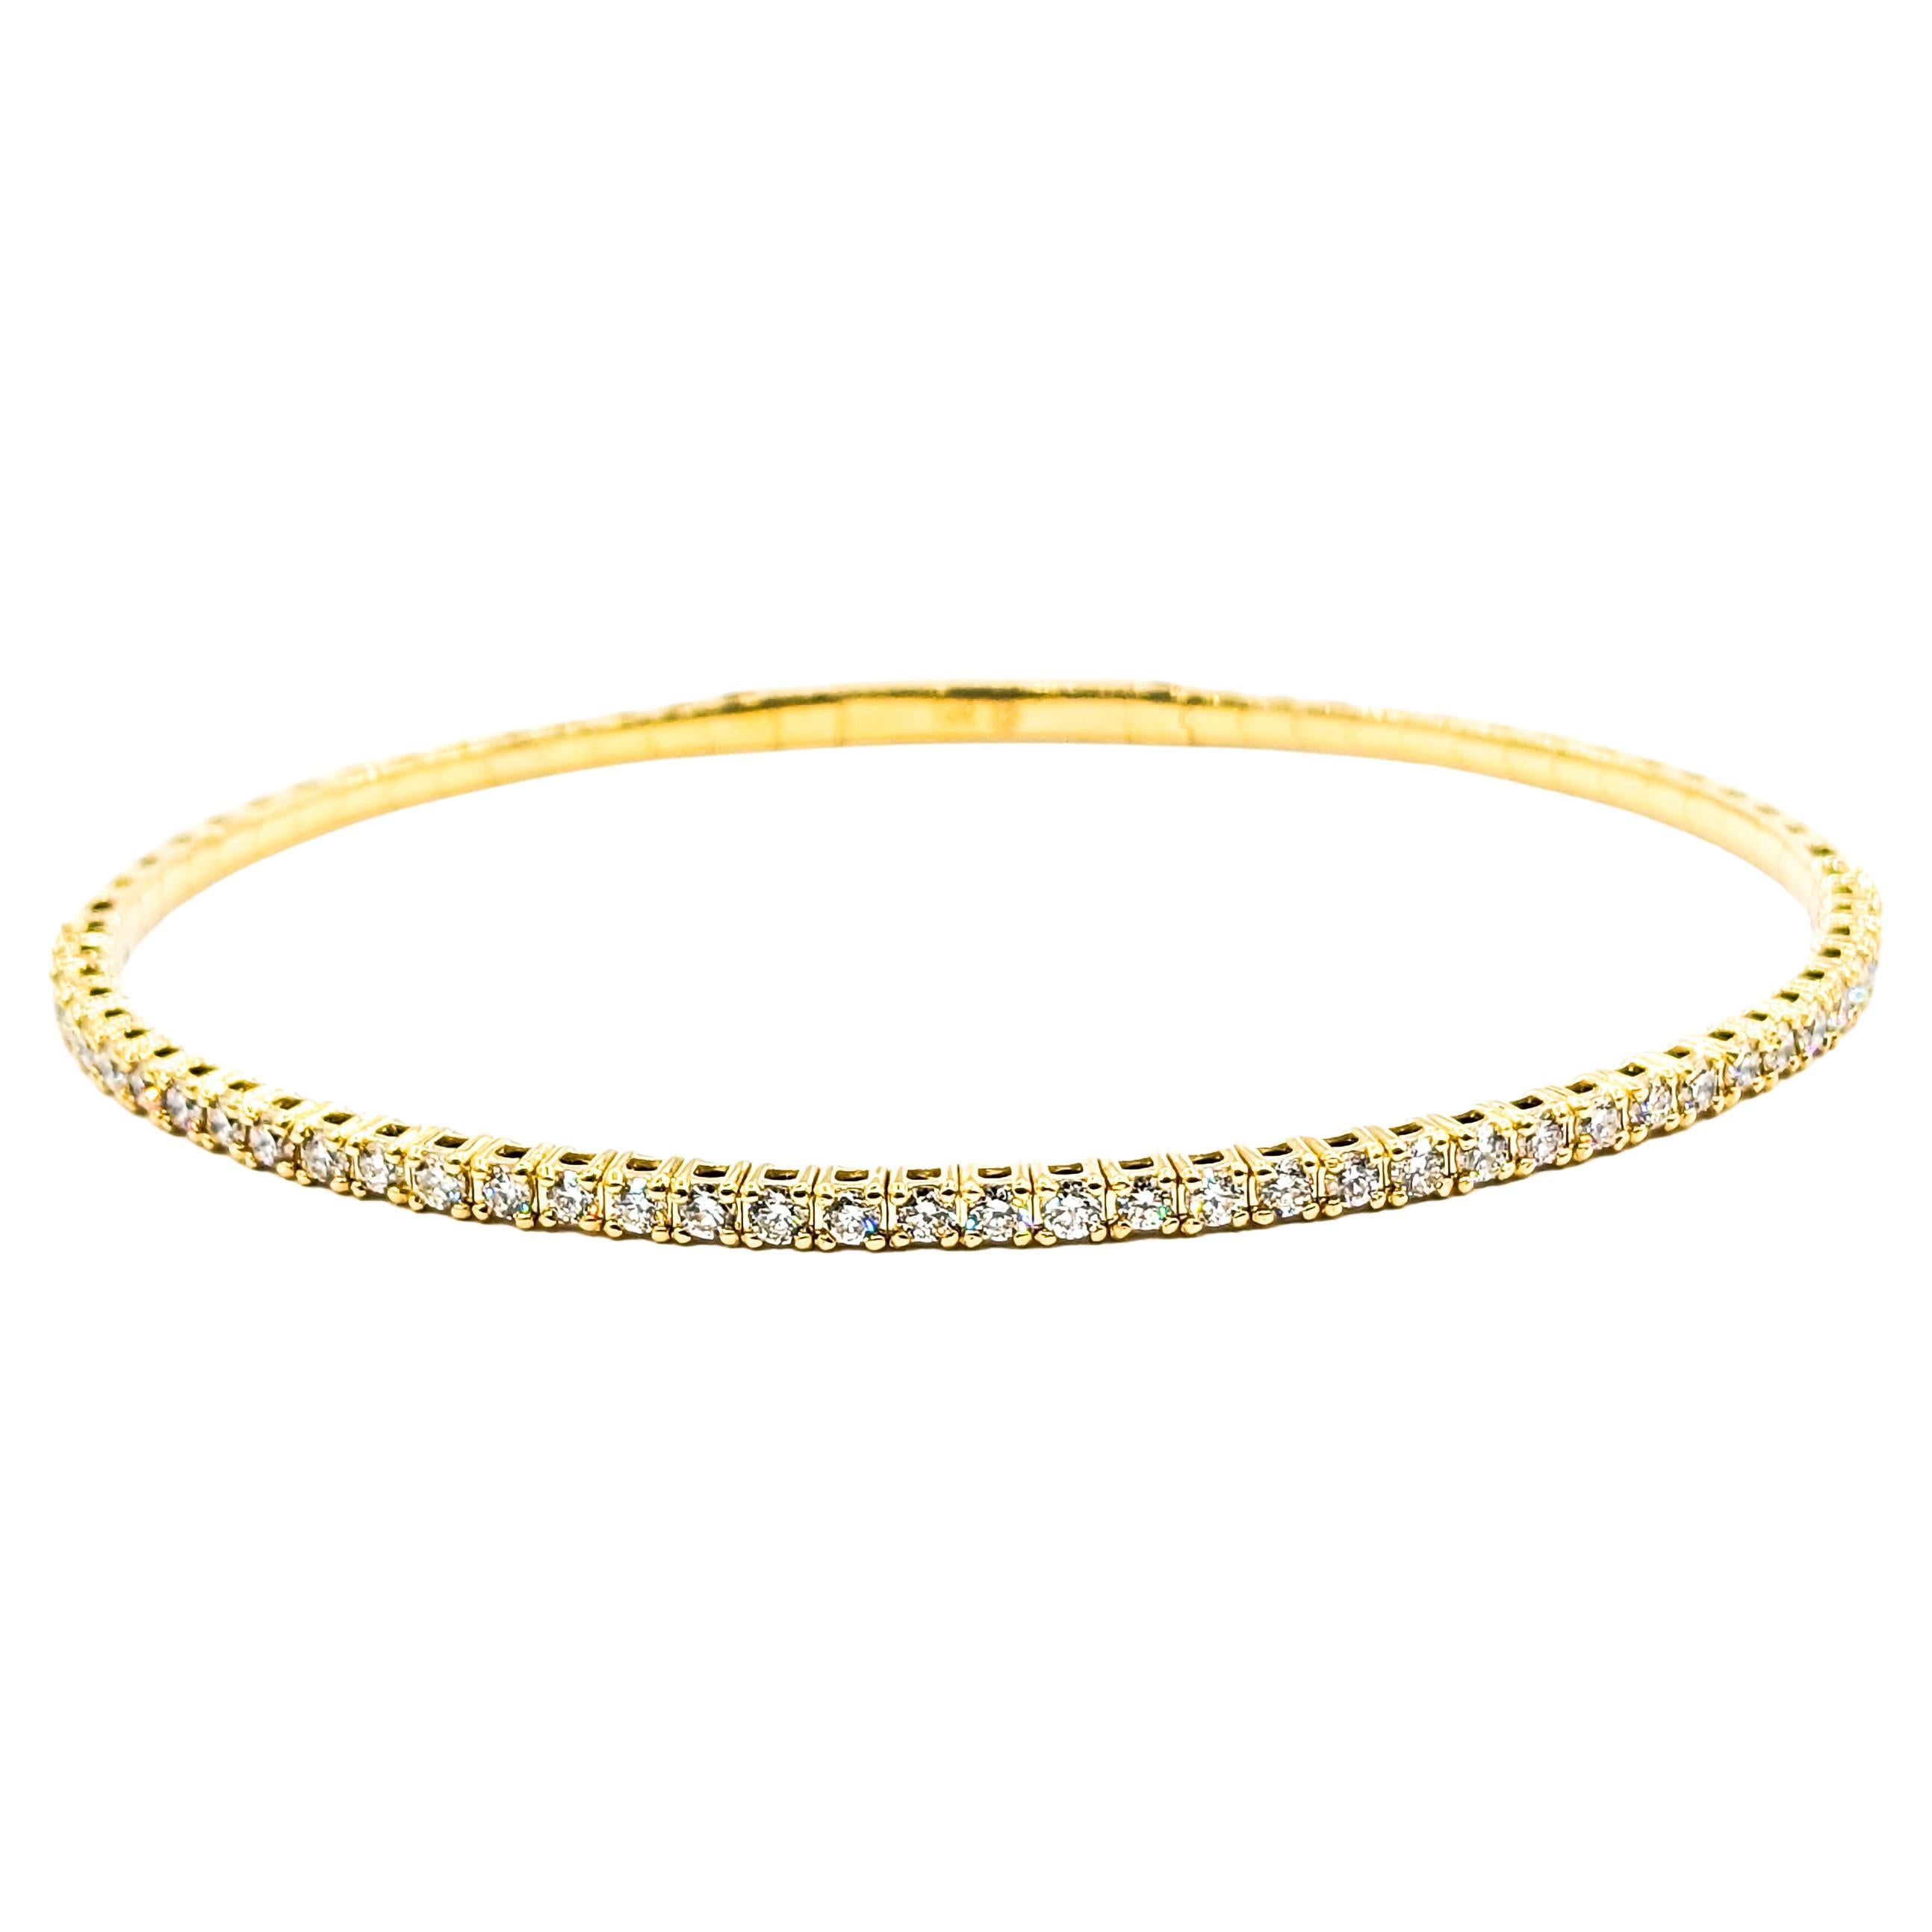 Ruby & Diamond Necklace Bar Yellow Gold

Introducing our stunning necklace, exquisitely crafted in 14kt yellow gold, featuring a bar of 0.09ctw diamonds that radiate sparkle. These diamonds, with SI clarity and a near colorless appearance, add a